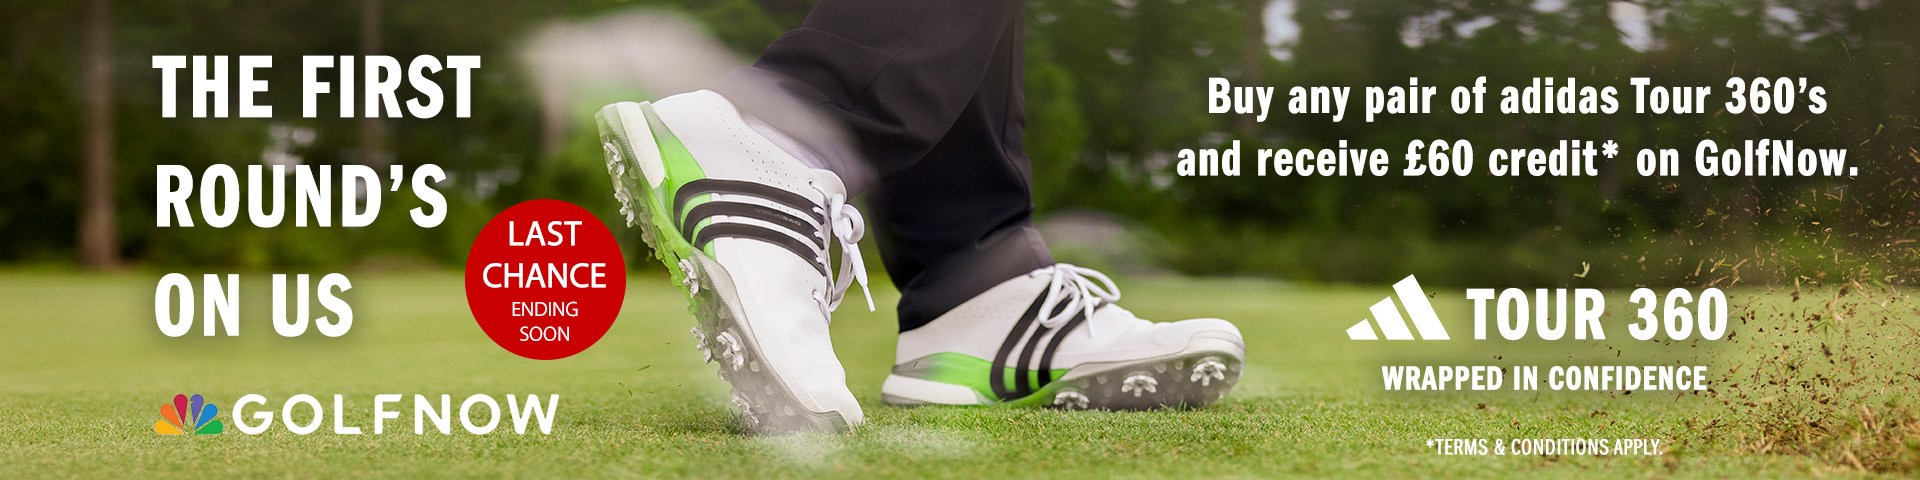 Banner swing-spring-exclusive-adidas-x-golfnow-promotion-nd-801285270